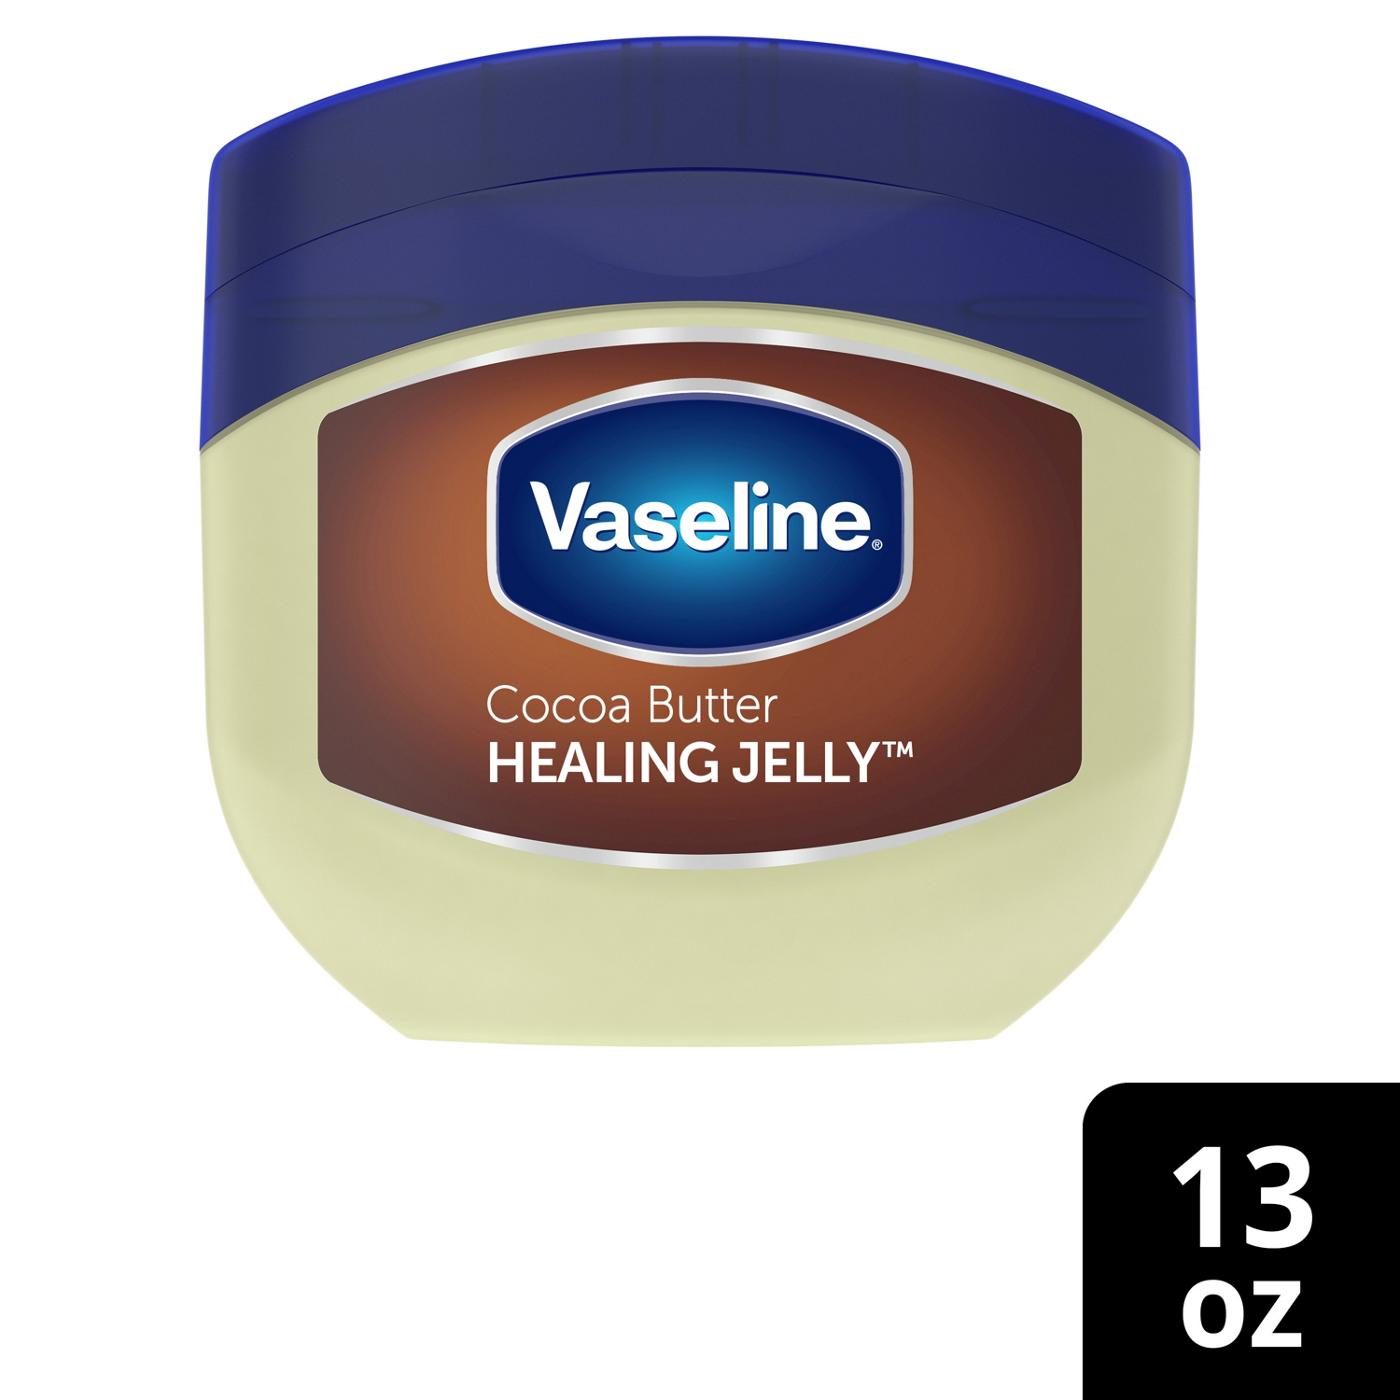 Vaseline Cocoa Butter Healing Jelly; image 2 of 4